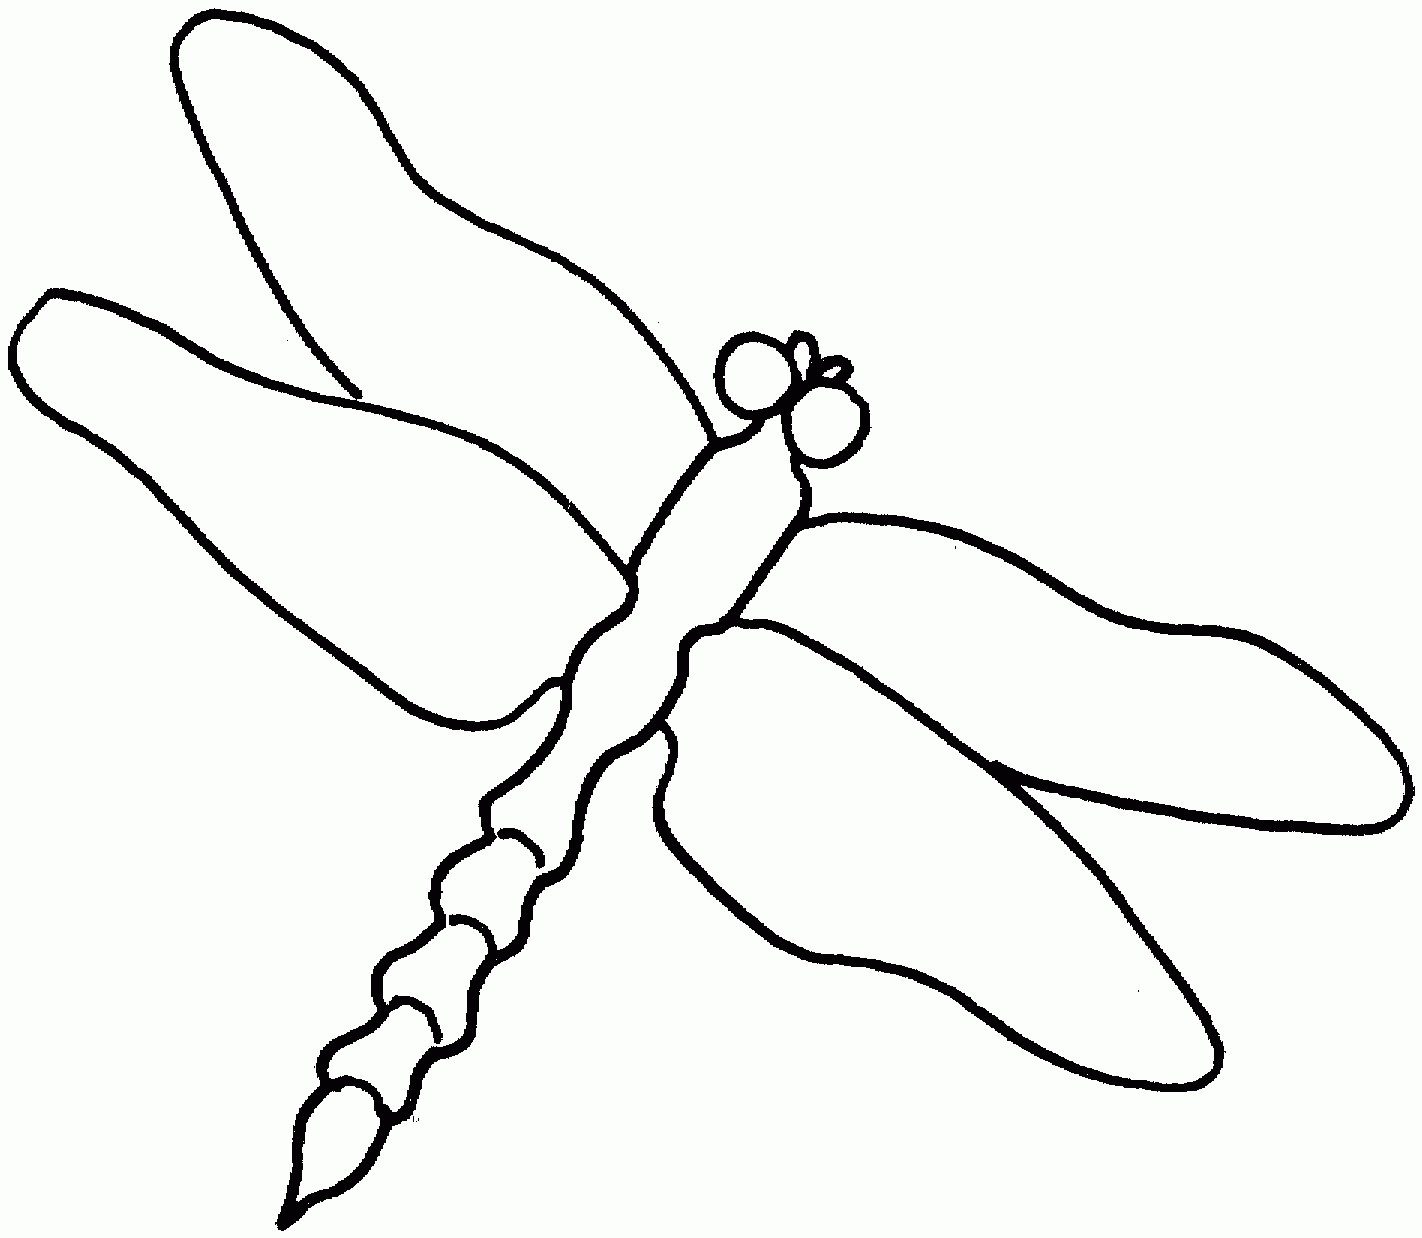 Free Dragonfly Outline, Download Free Clip Art, Free Clip Art On - Free Printable Pictures Of Dragonflies